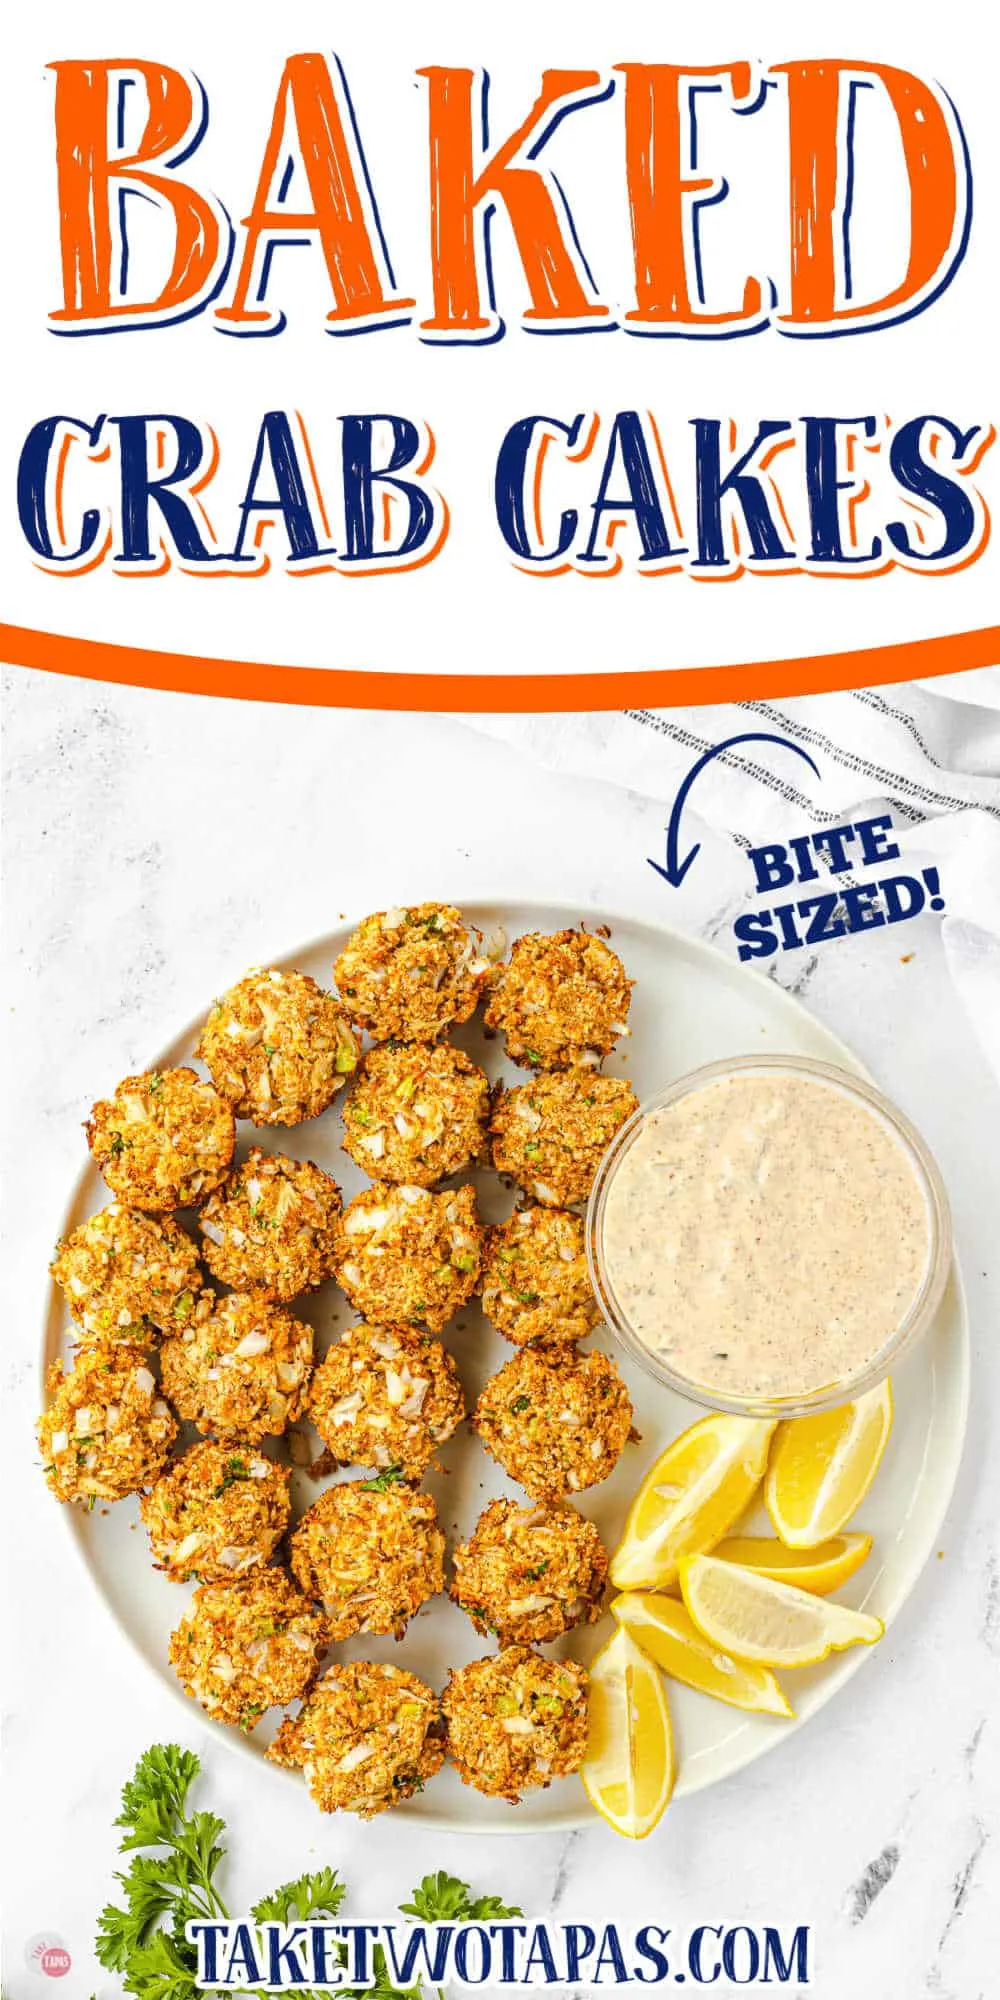 platter of crab cakes with text "crabcakes"